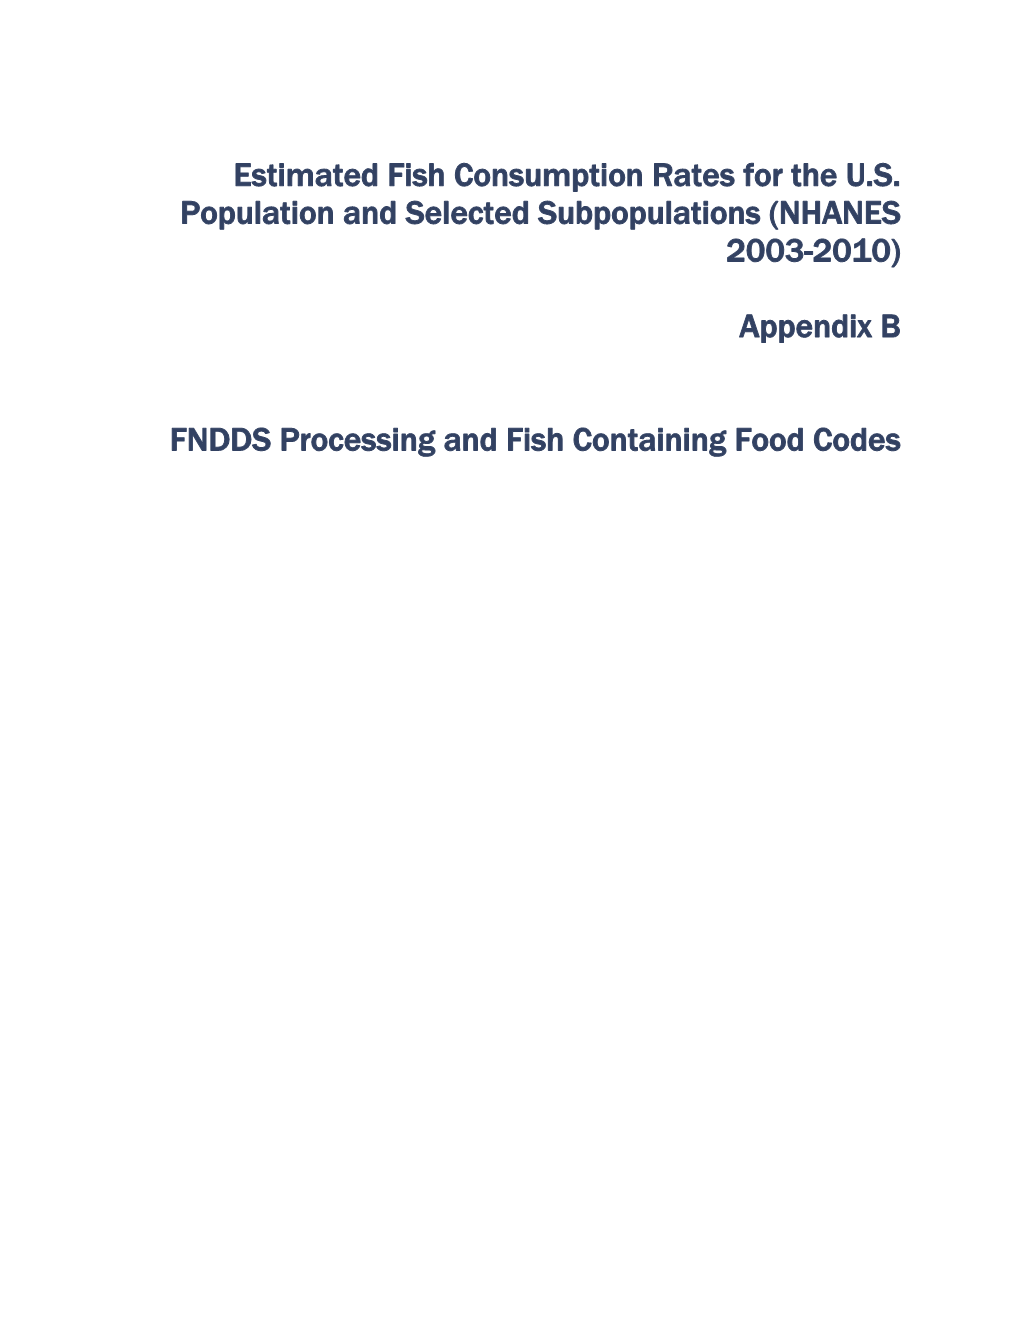 Estimated Fish Consumption Rates for the U.S. Population and Selected Subpopulations (NHANES 2003-2010) Appendix B Fish-Contain